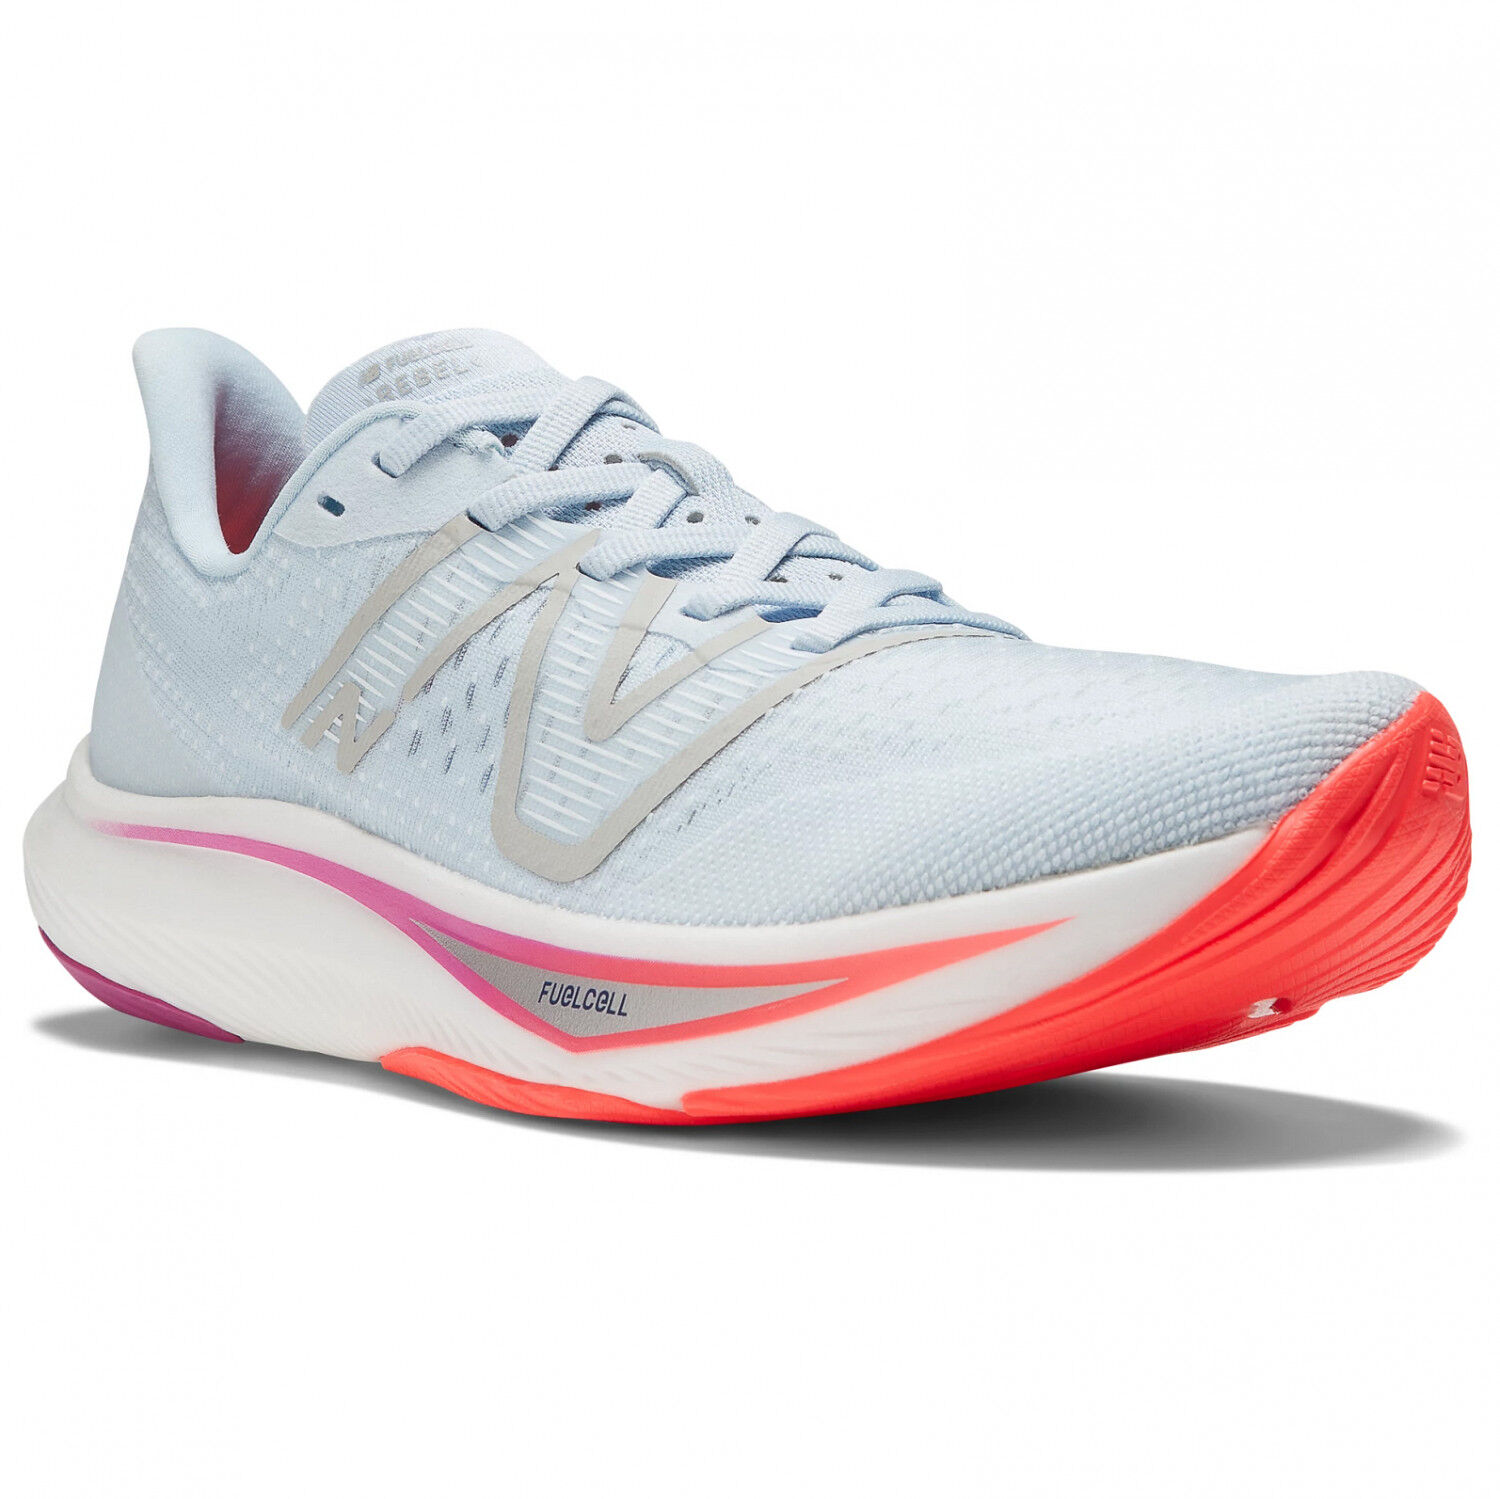 New Balance FuelCell Rebel V2 - Running shoes - Women's